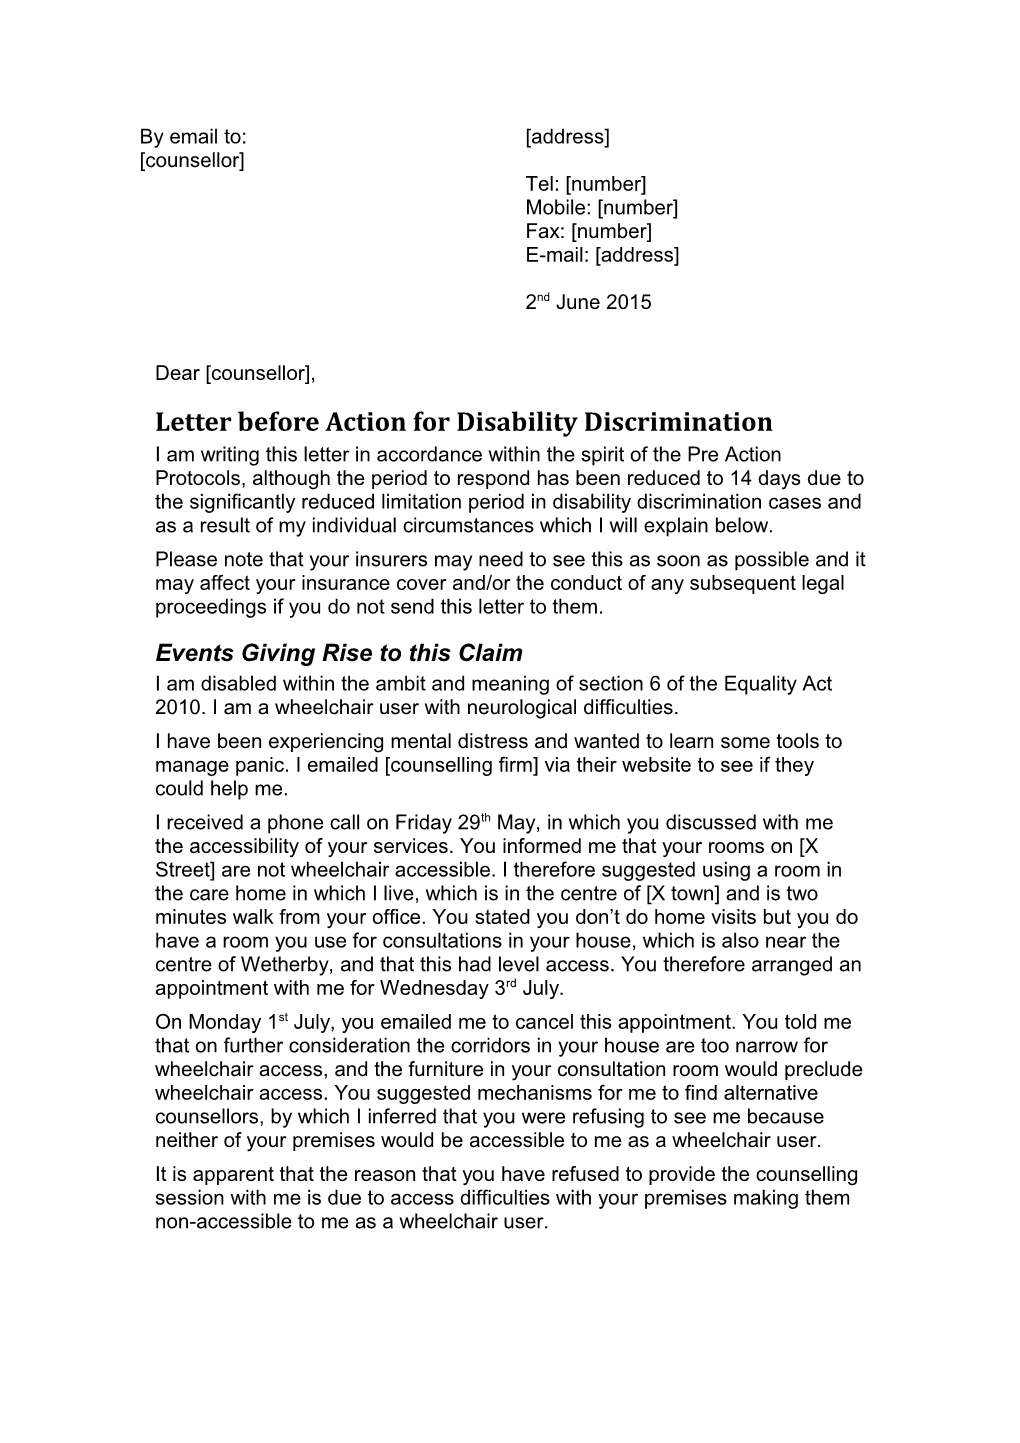 Letter Before Action for Disability Discrimination